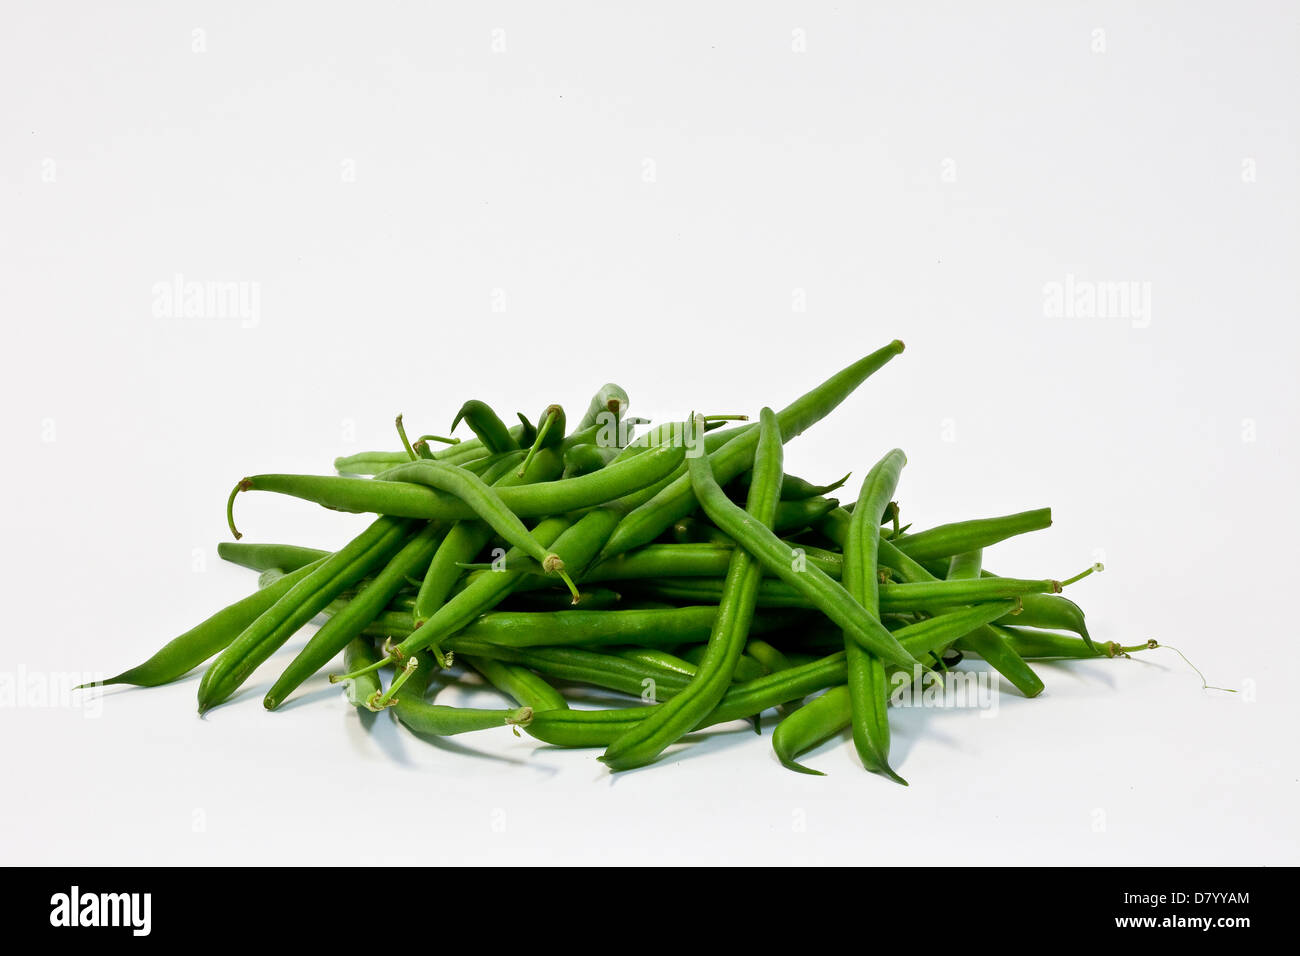 A pile of fresh green beans against a white background. Stock Photo